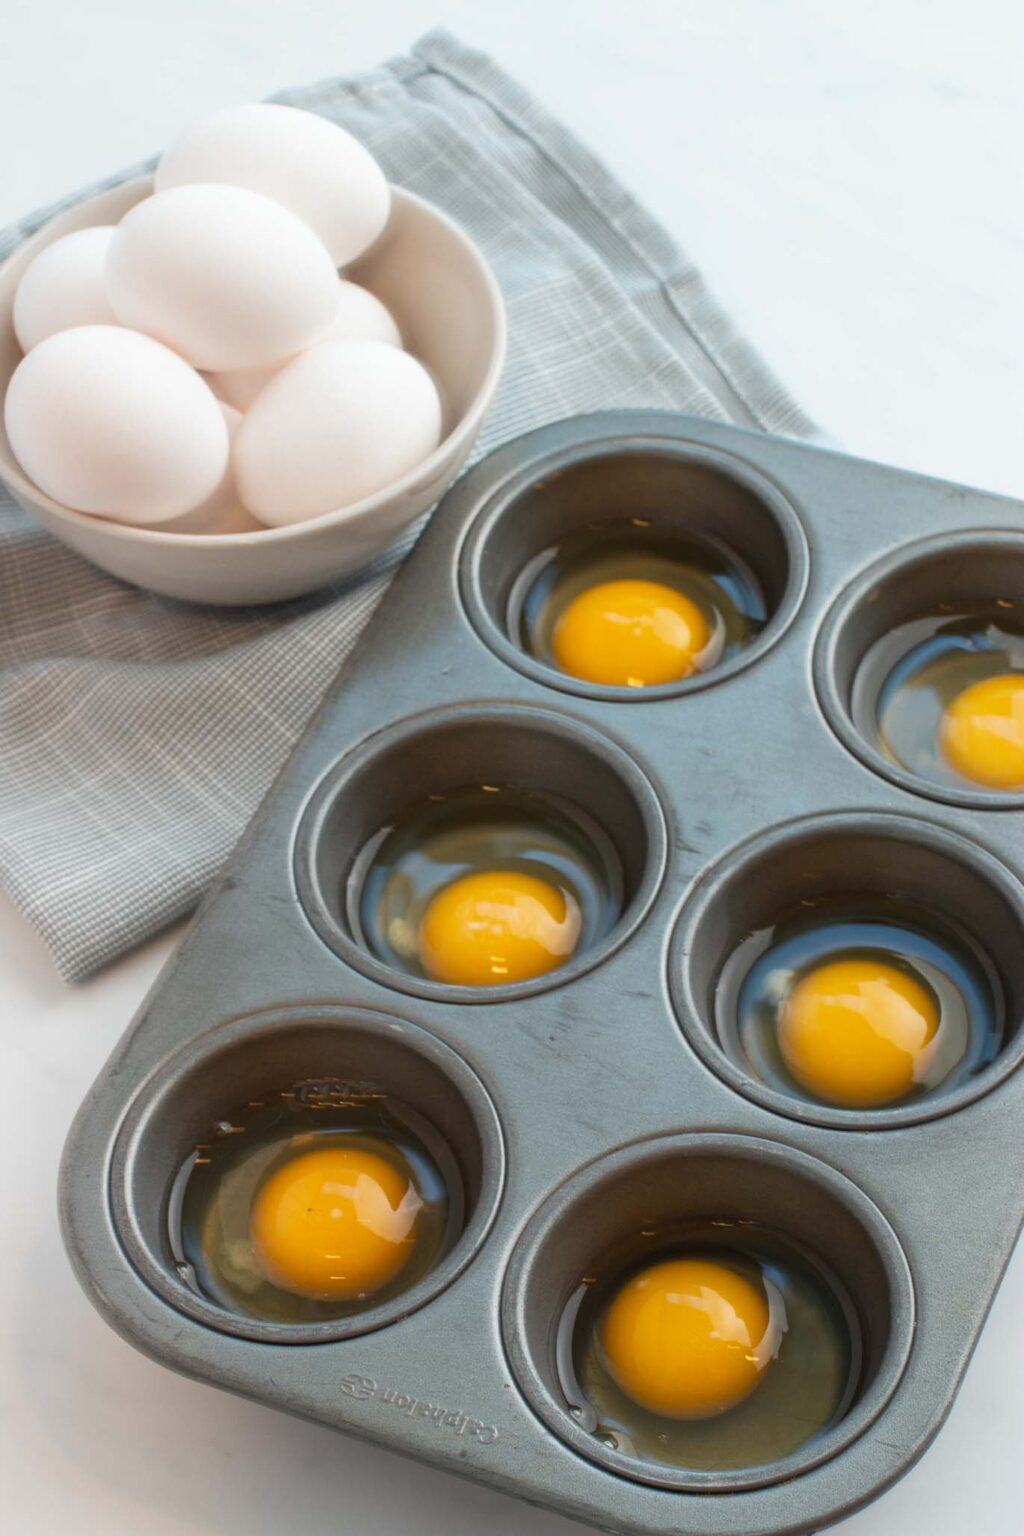 can-you-freeze-eggs-yes-here-is-how-to-freeze-eggs